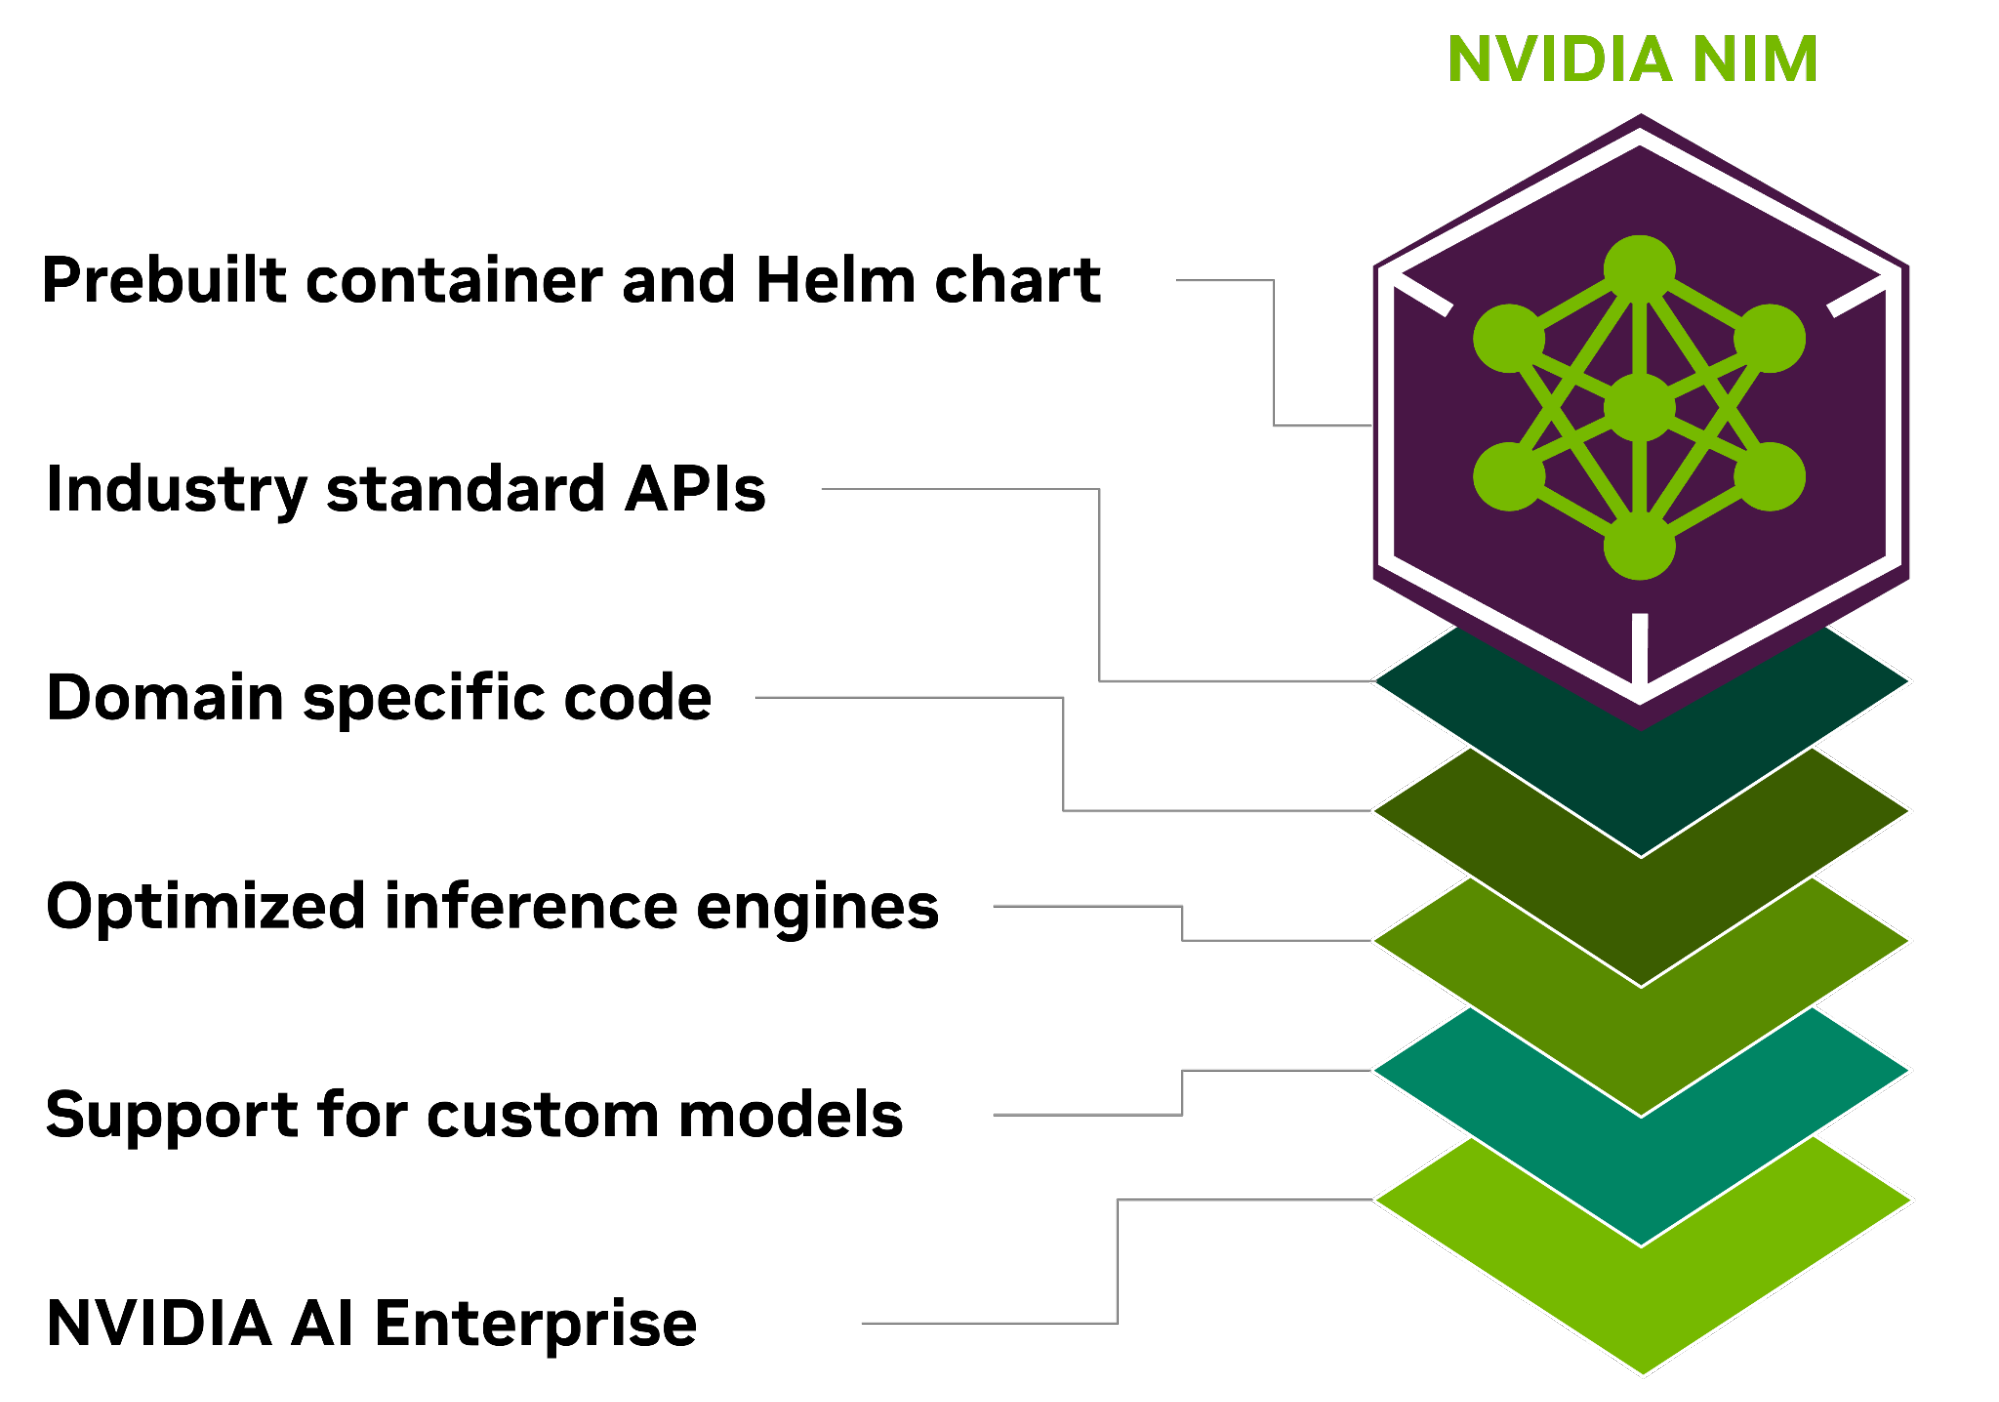 The image is a graphic representation of the NVIDIA NIM ecosystem's components.